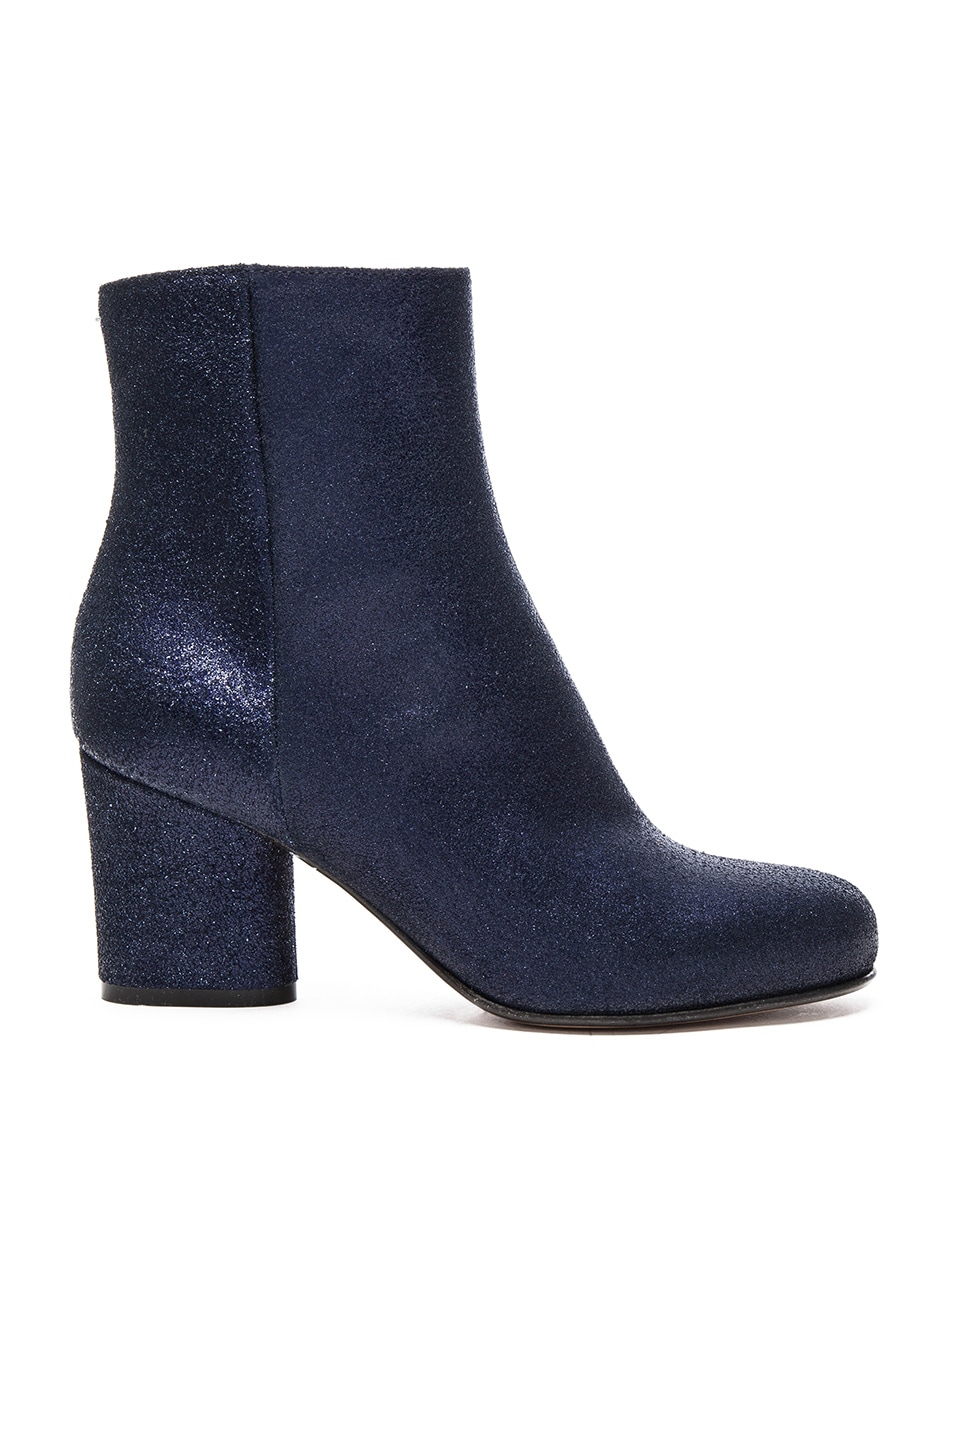 Image 1 of Maison Margiela Metallic Leather Booties in Blue